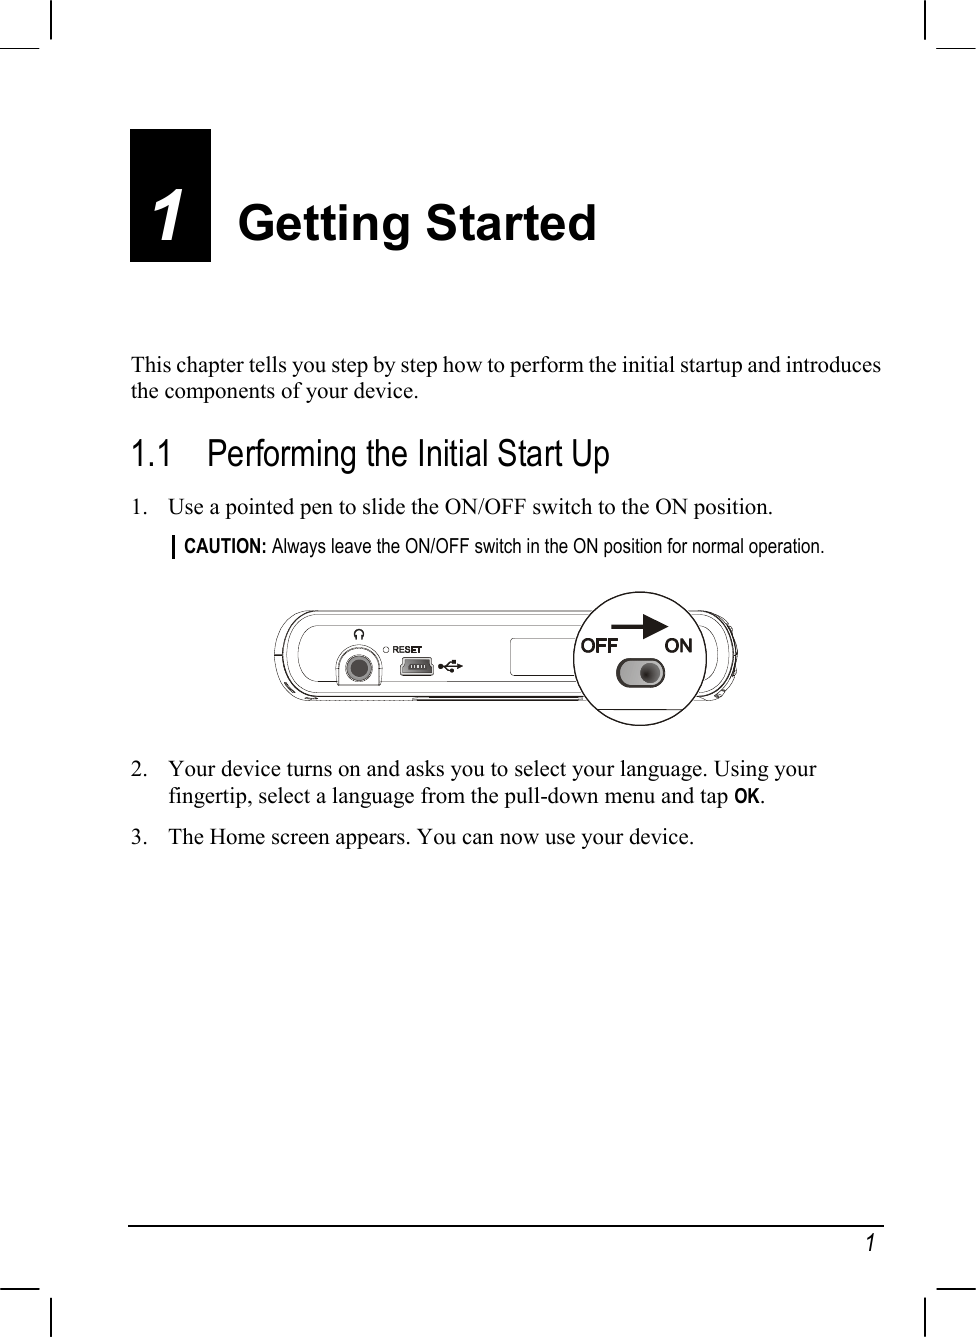   1 1  Getting Started This chapter tells you step by step how to perform the initial startup and introduces the components of your device. 1.1  Performing the Initial Start Up 1.  Use a pointed pen to slide the ON/OFF switch to the ON position. CAUTION: Always leave the ON/OFF switch in the ON position for normal operation.   2.  Your device turns on and asks you to select your language. Using your fingertip, select a language from the pull-down menu and tap OK. 3.  The Home screen appears. You can now use your device.        